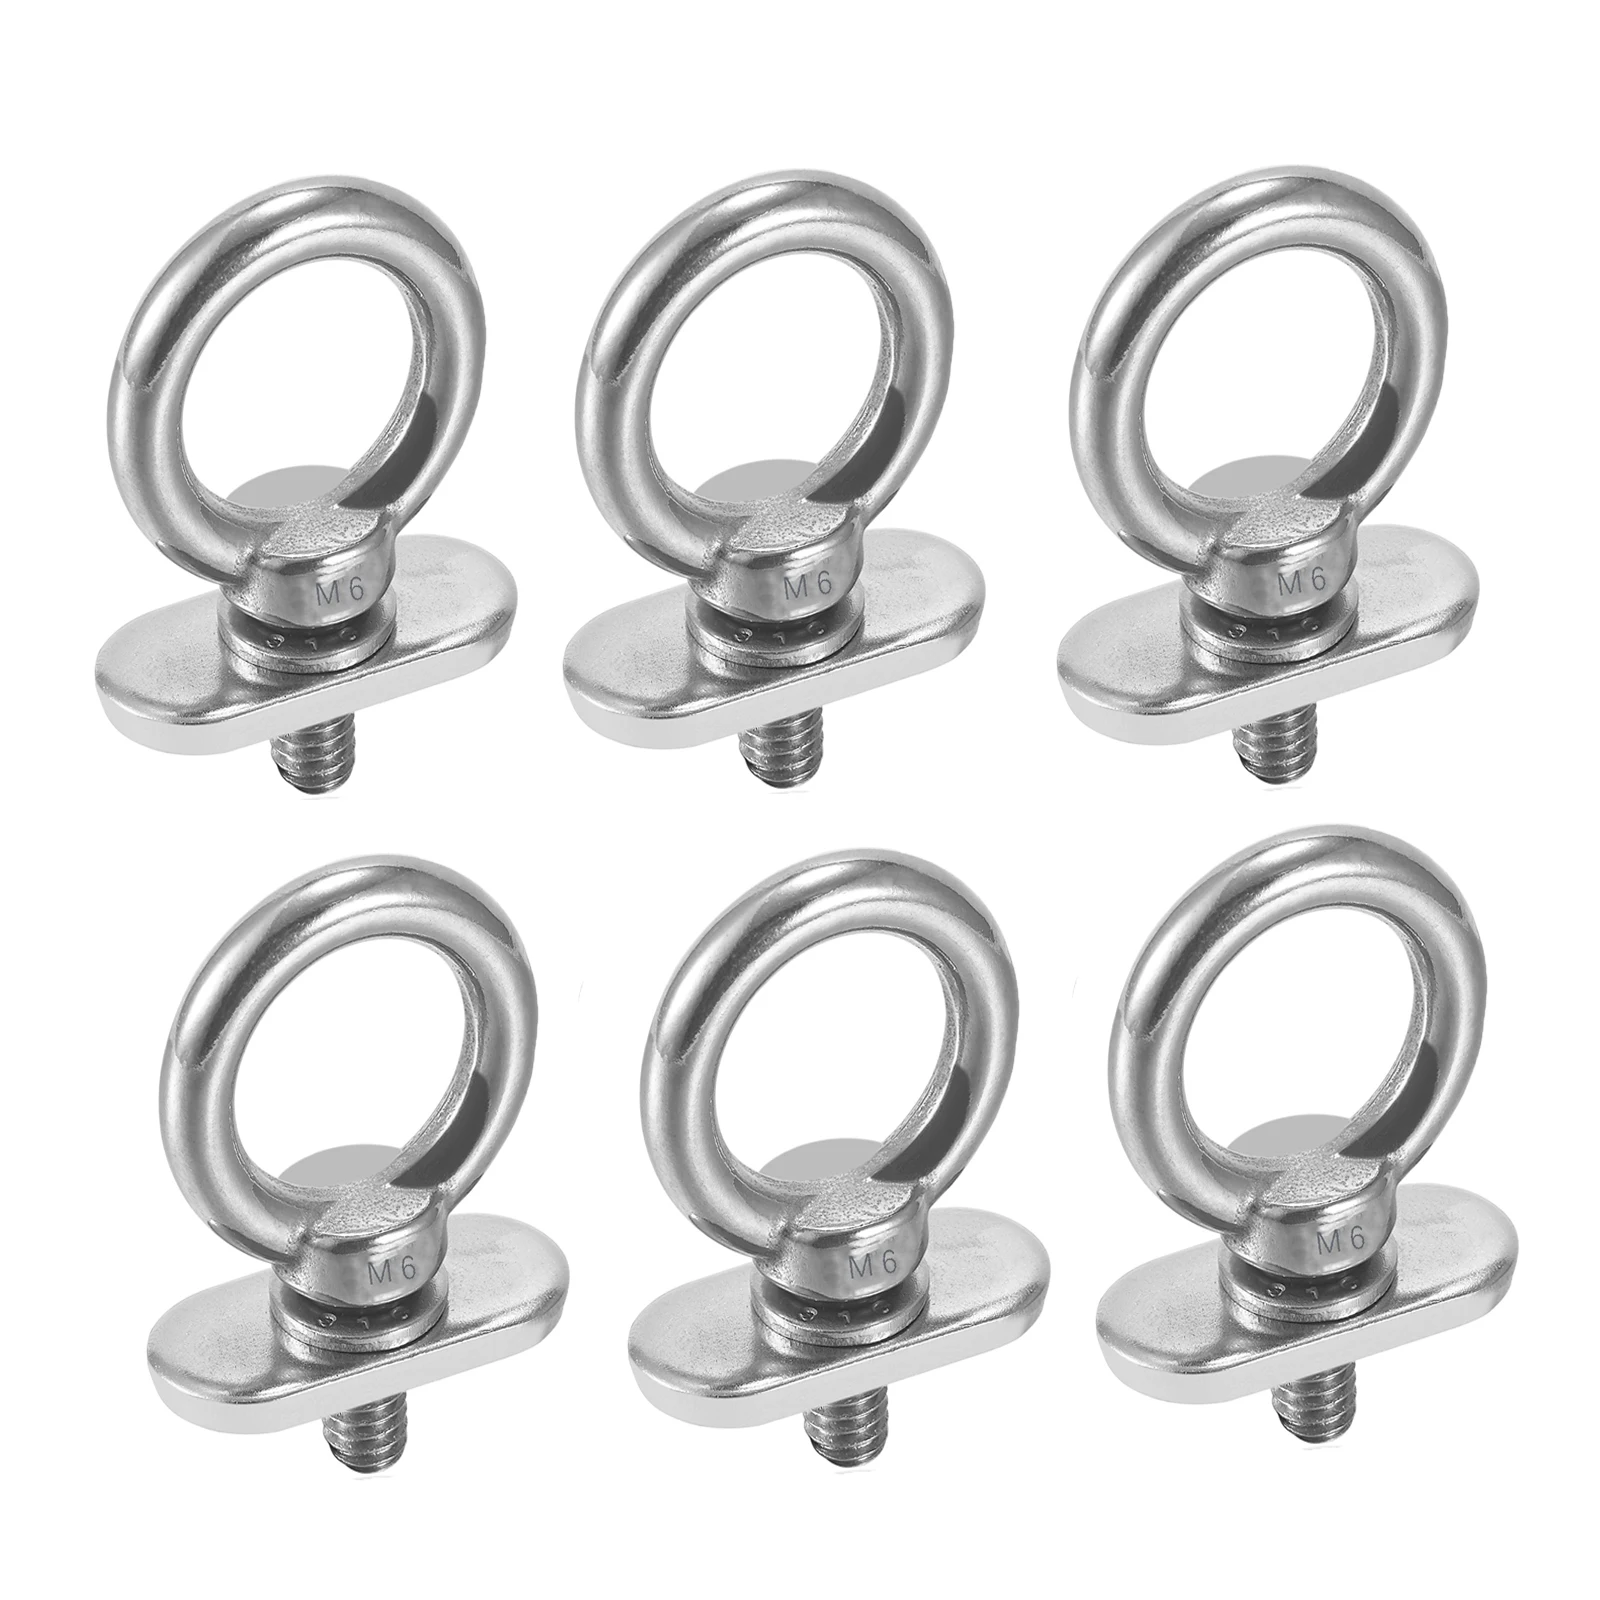 Track Mount Tie Down Eyelets, M6 Bolt, 316 Stainless Steel，Kayak Track Accessories (6 Packs) 2pc ram mount track mounting base track gear attachment adapter kayak track mount for kayak boat canoe fishing rod accessories